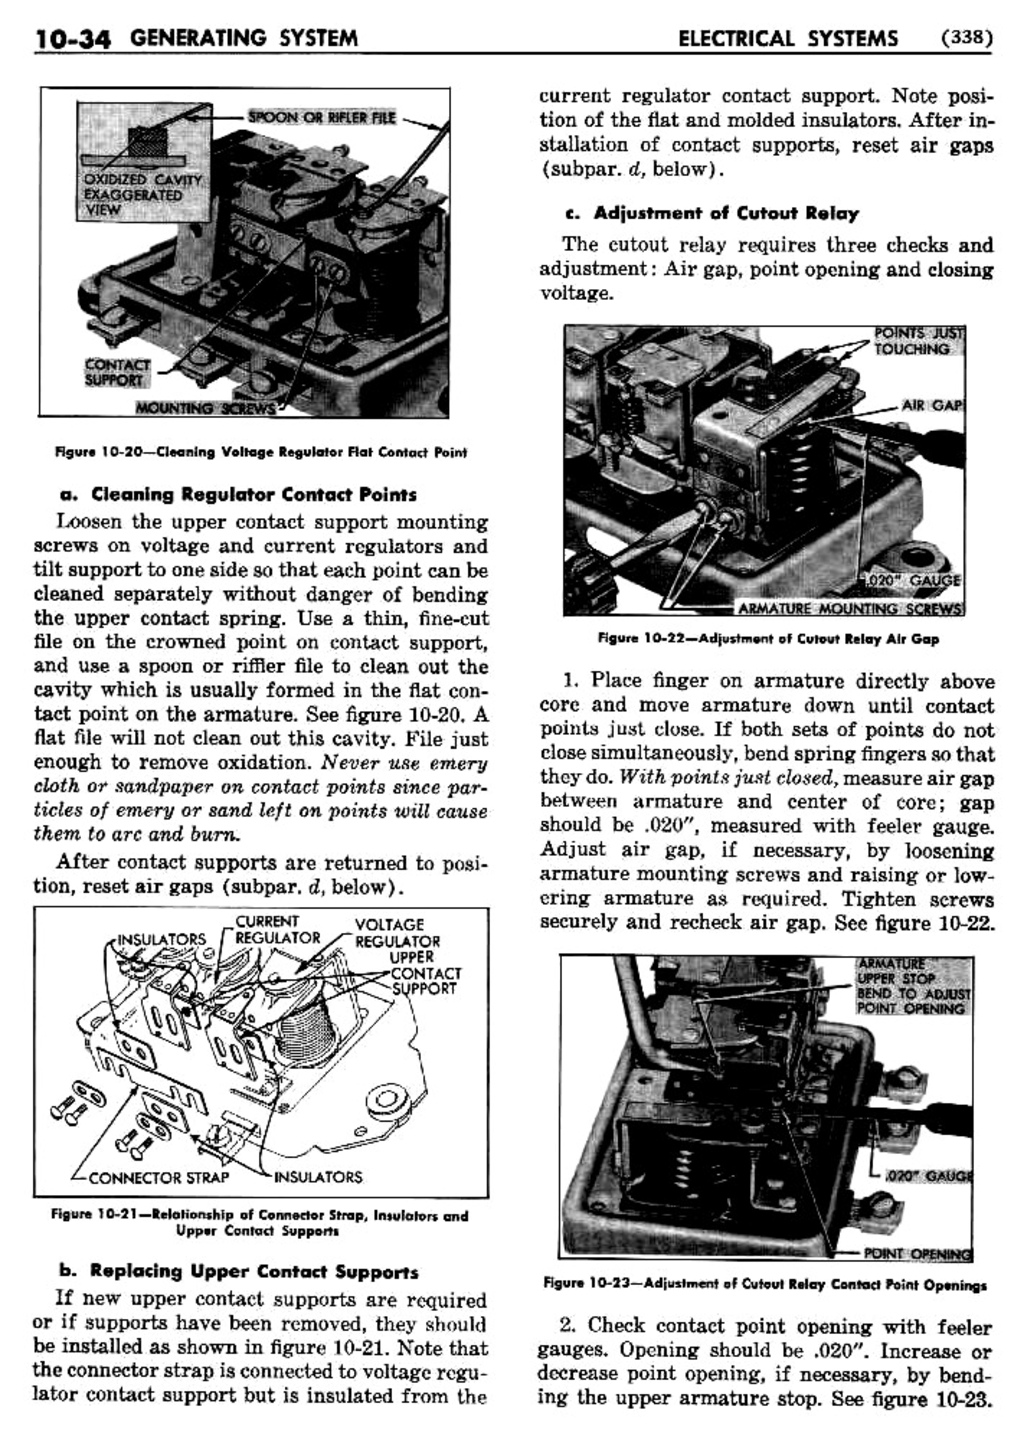 n_11 1955 Buick Shop Manual - Electrical Systems-034-034.jpg